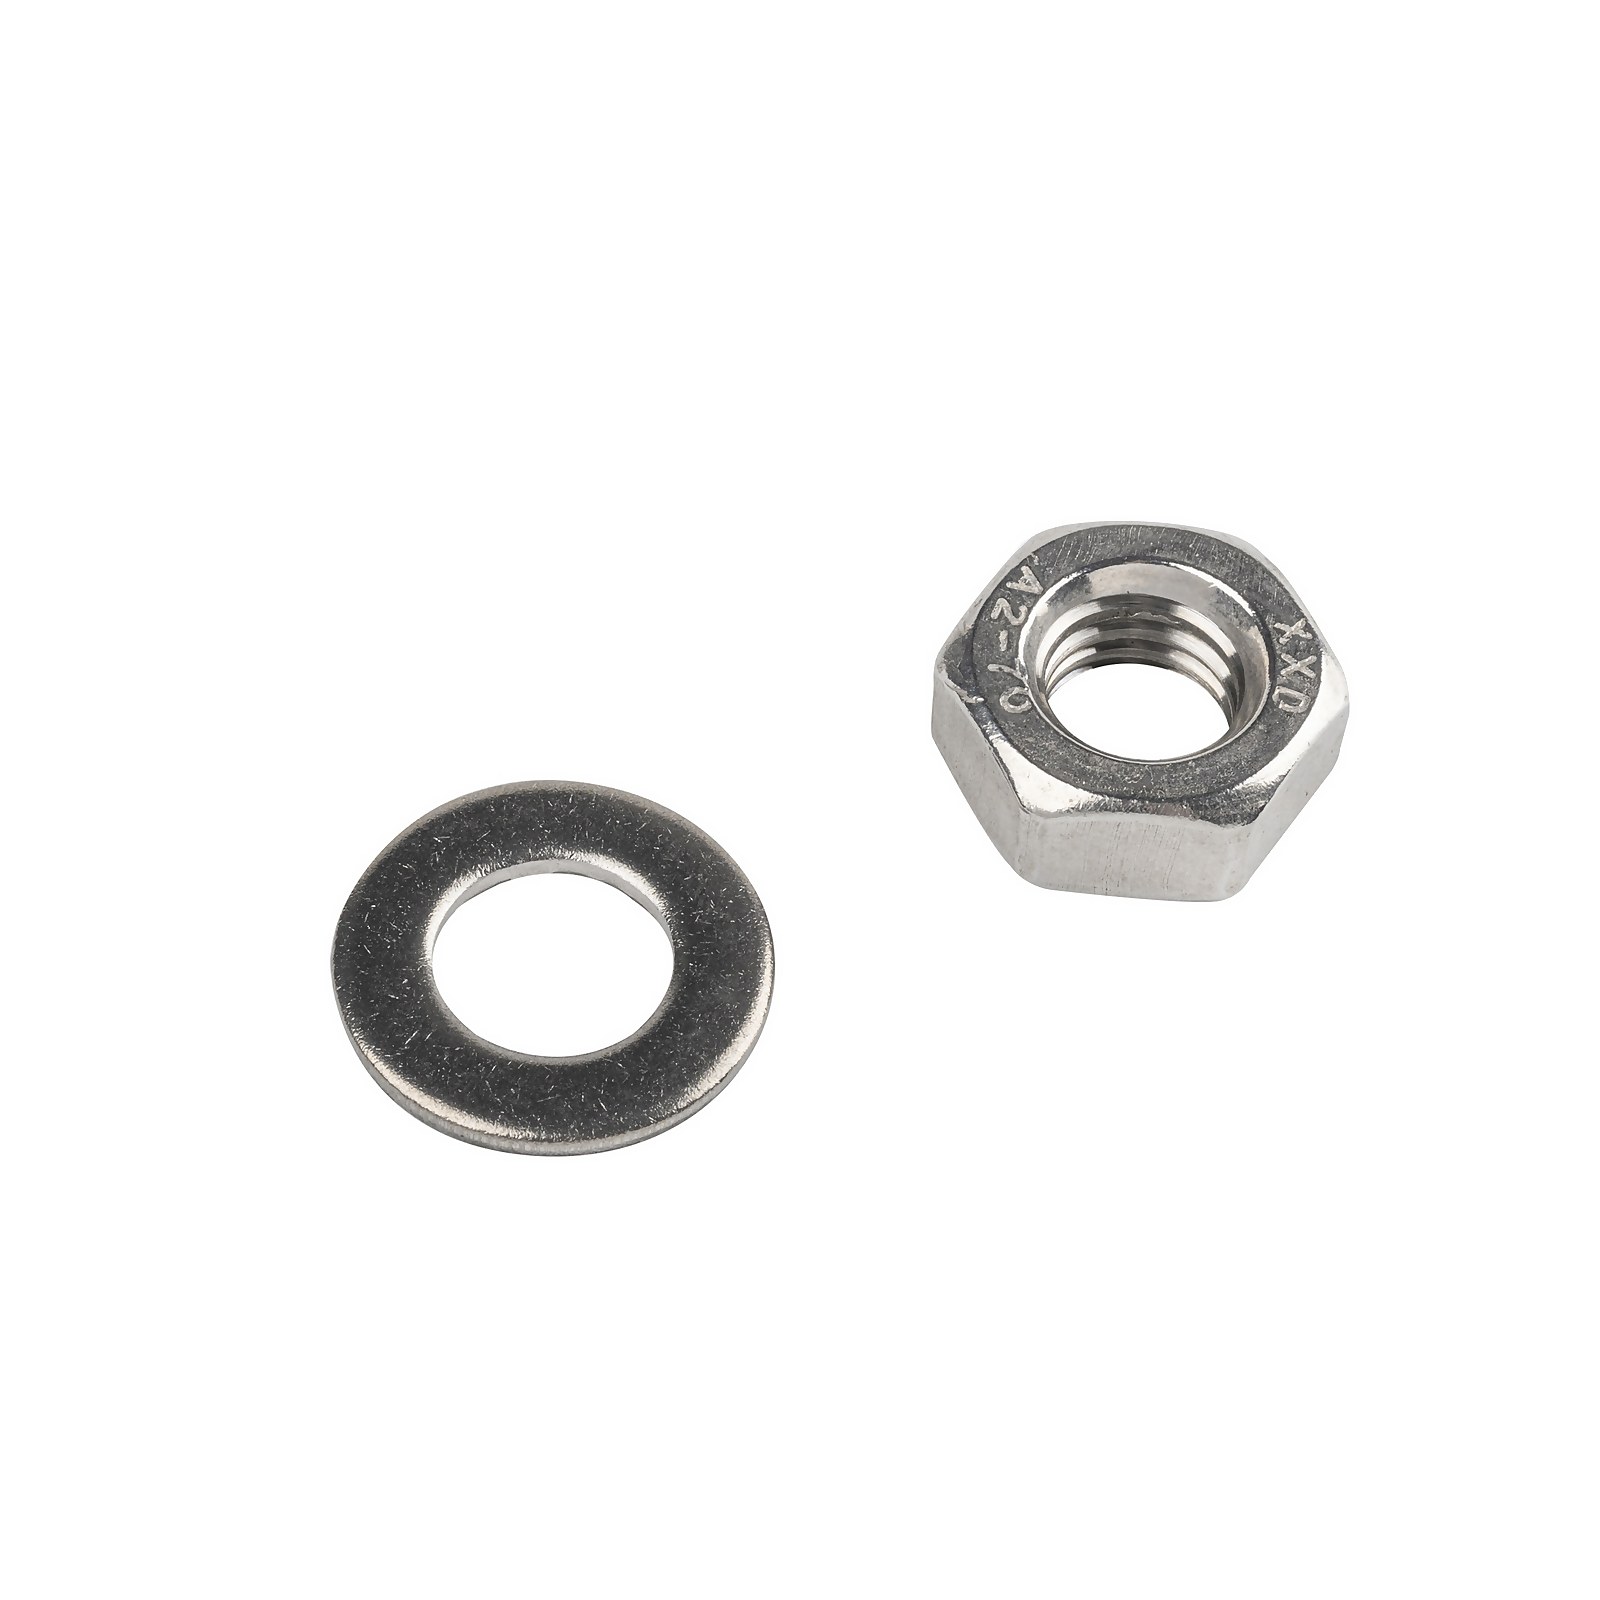 Photo of Homebase Stainless Steel Hex Nut & Washer M10 5 Pack